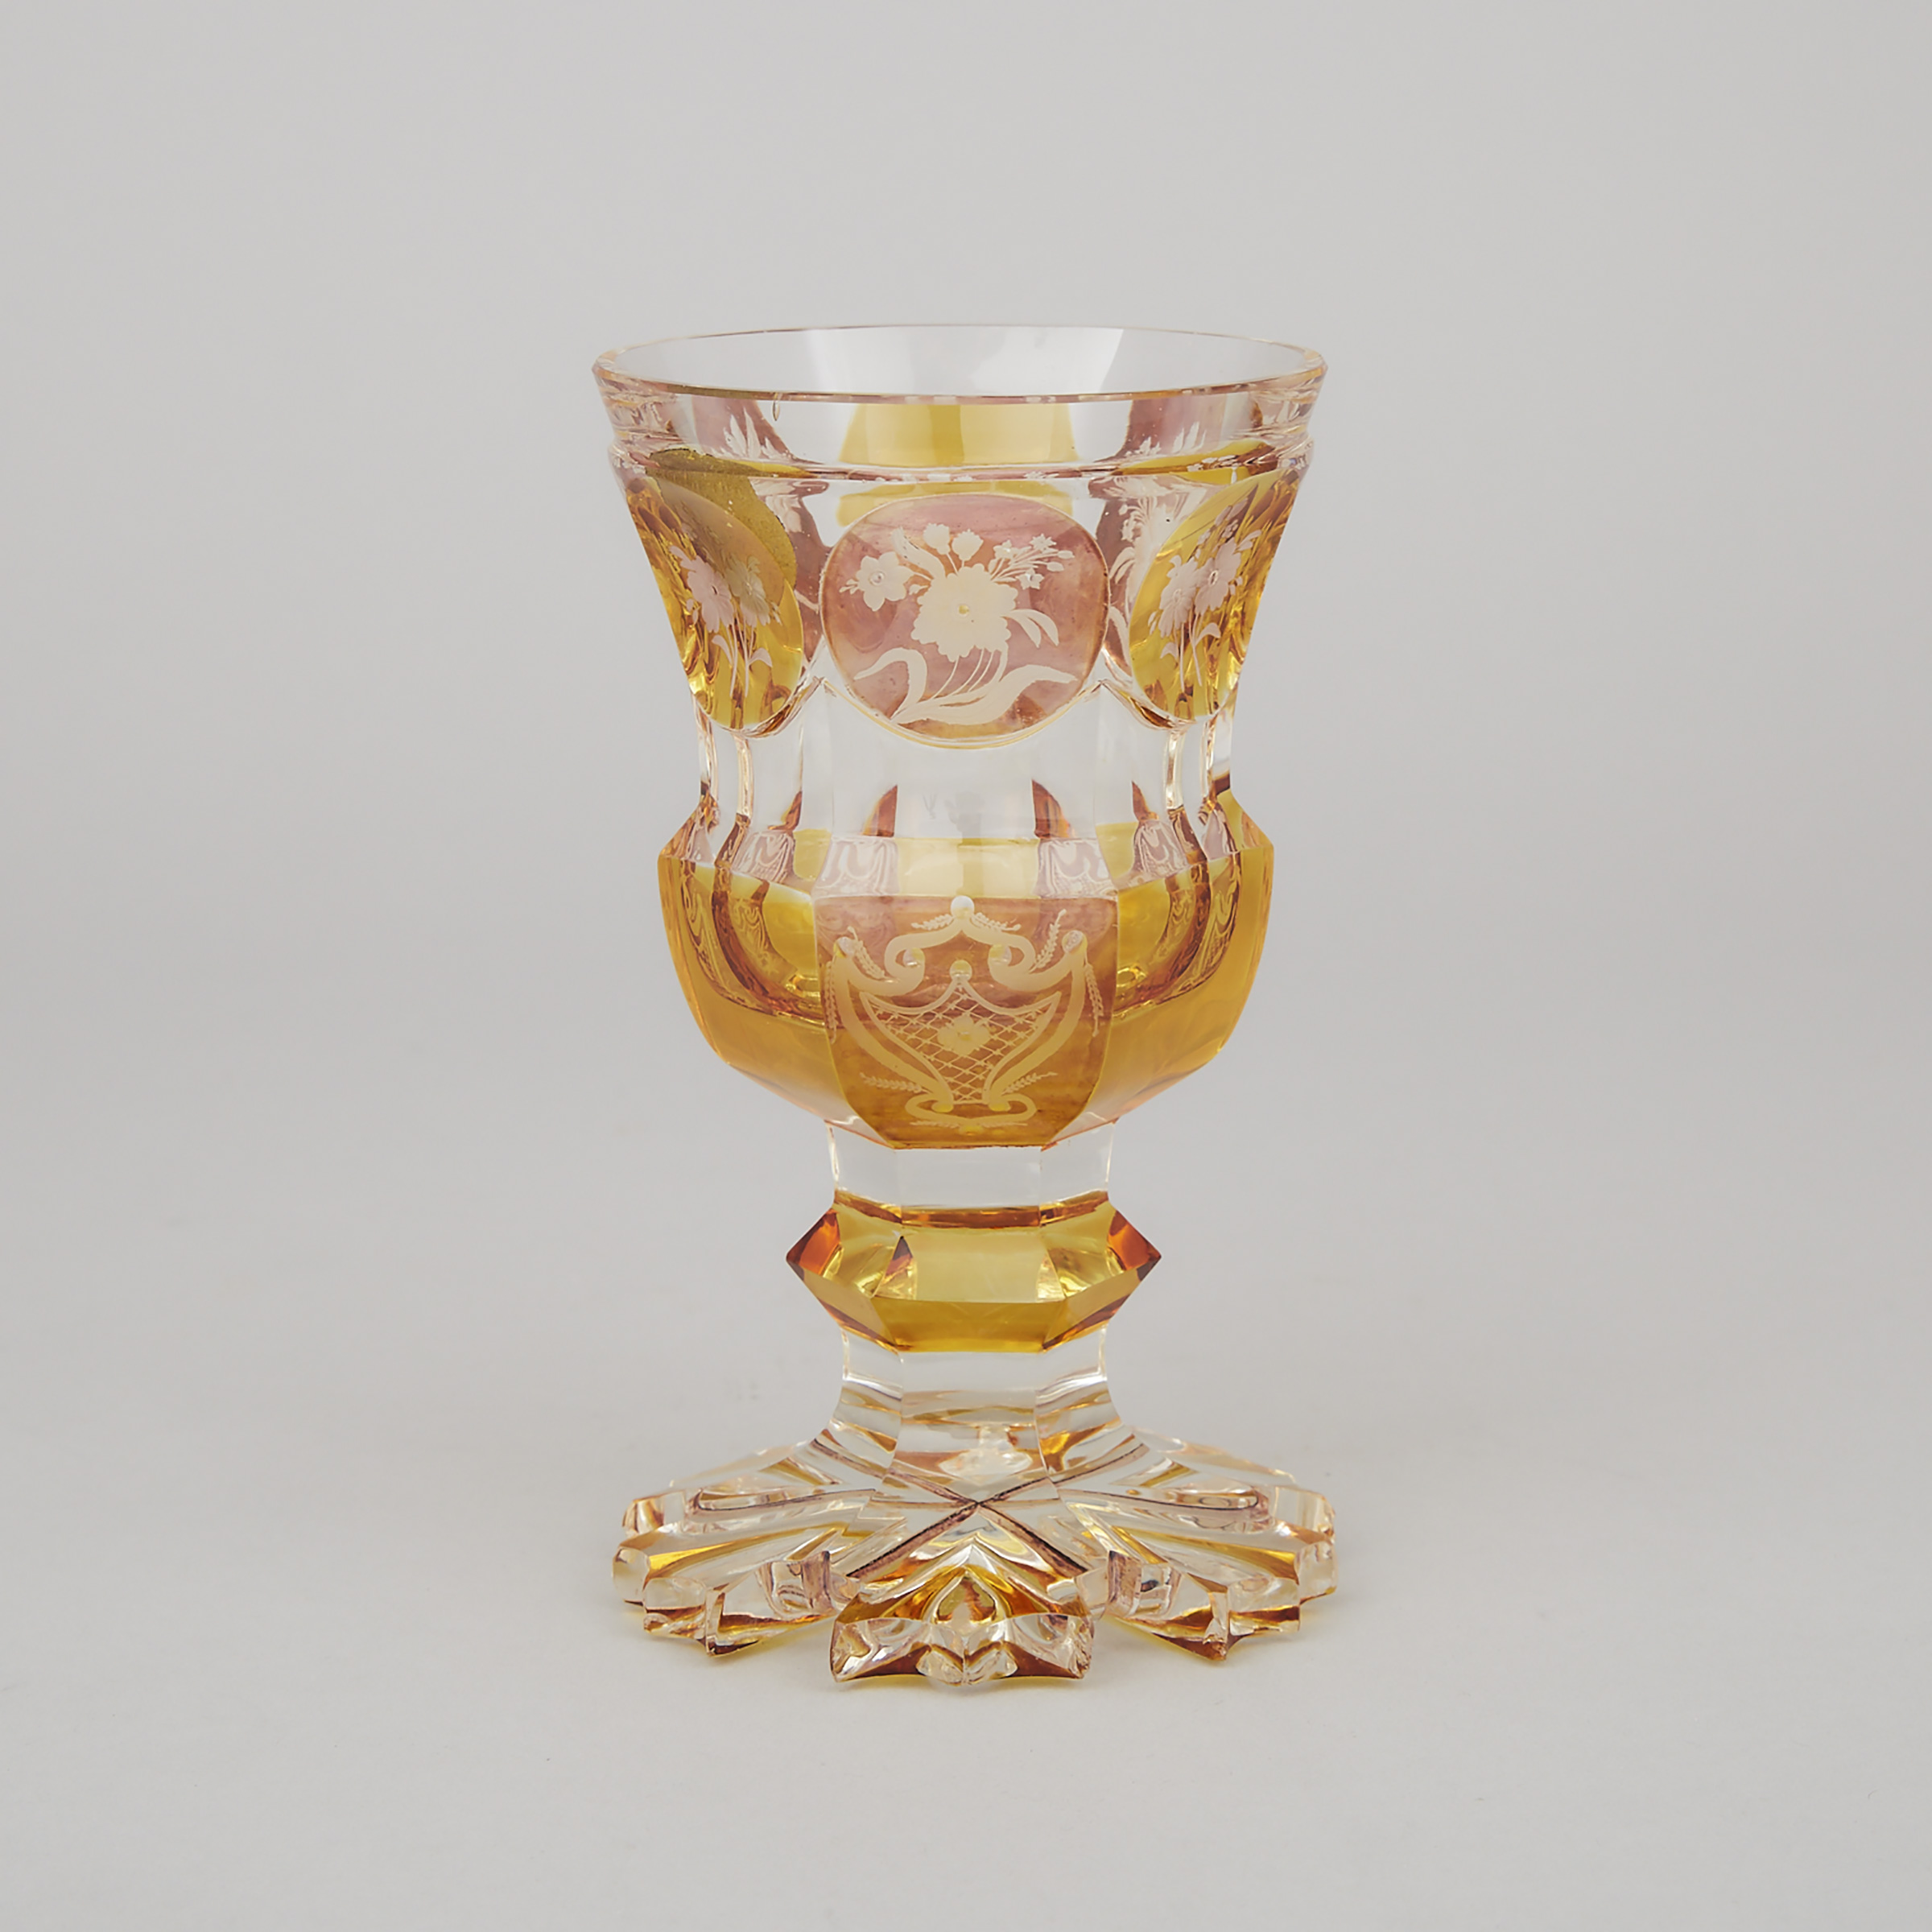 Bohemian Amber Overlaid, Rose Enameled, Cut and Etched Glass Goblet, mid-19th century